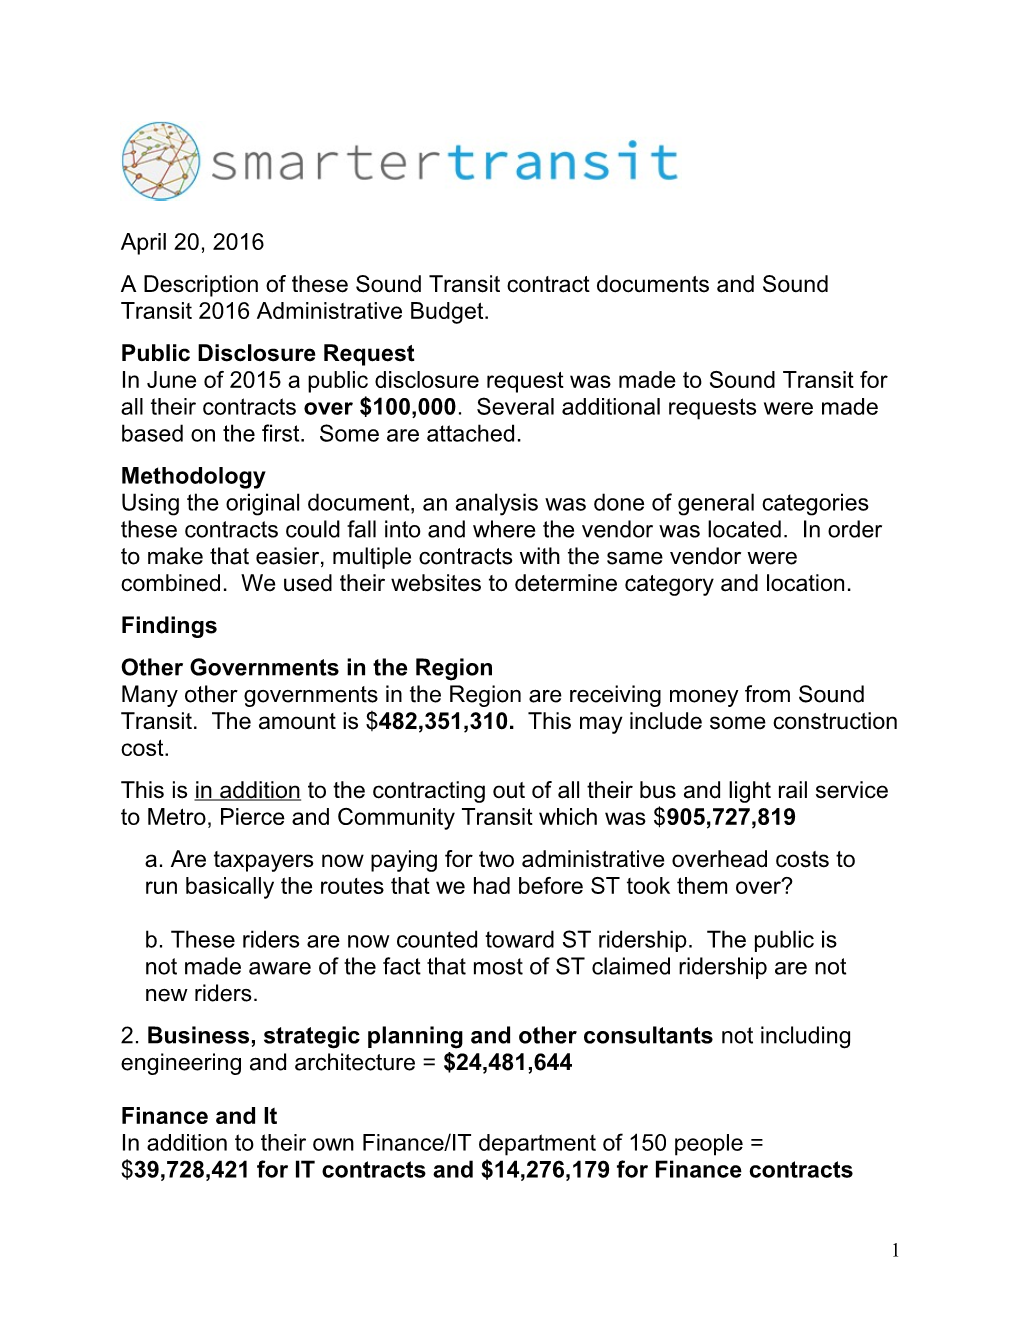 A Description of These Sound Transit Contract Documents and Sound Transit 2016 Administrative